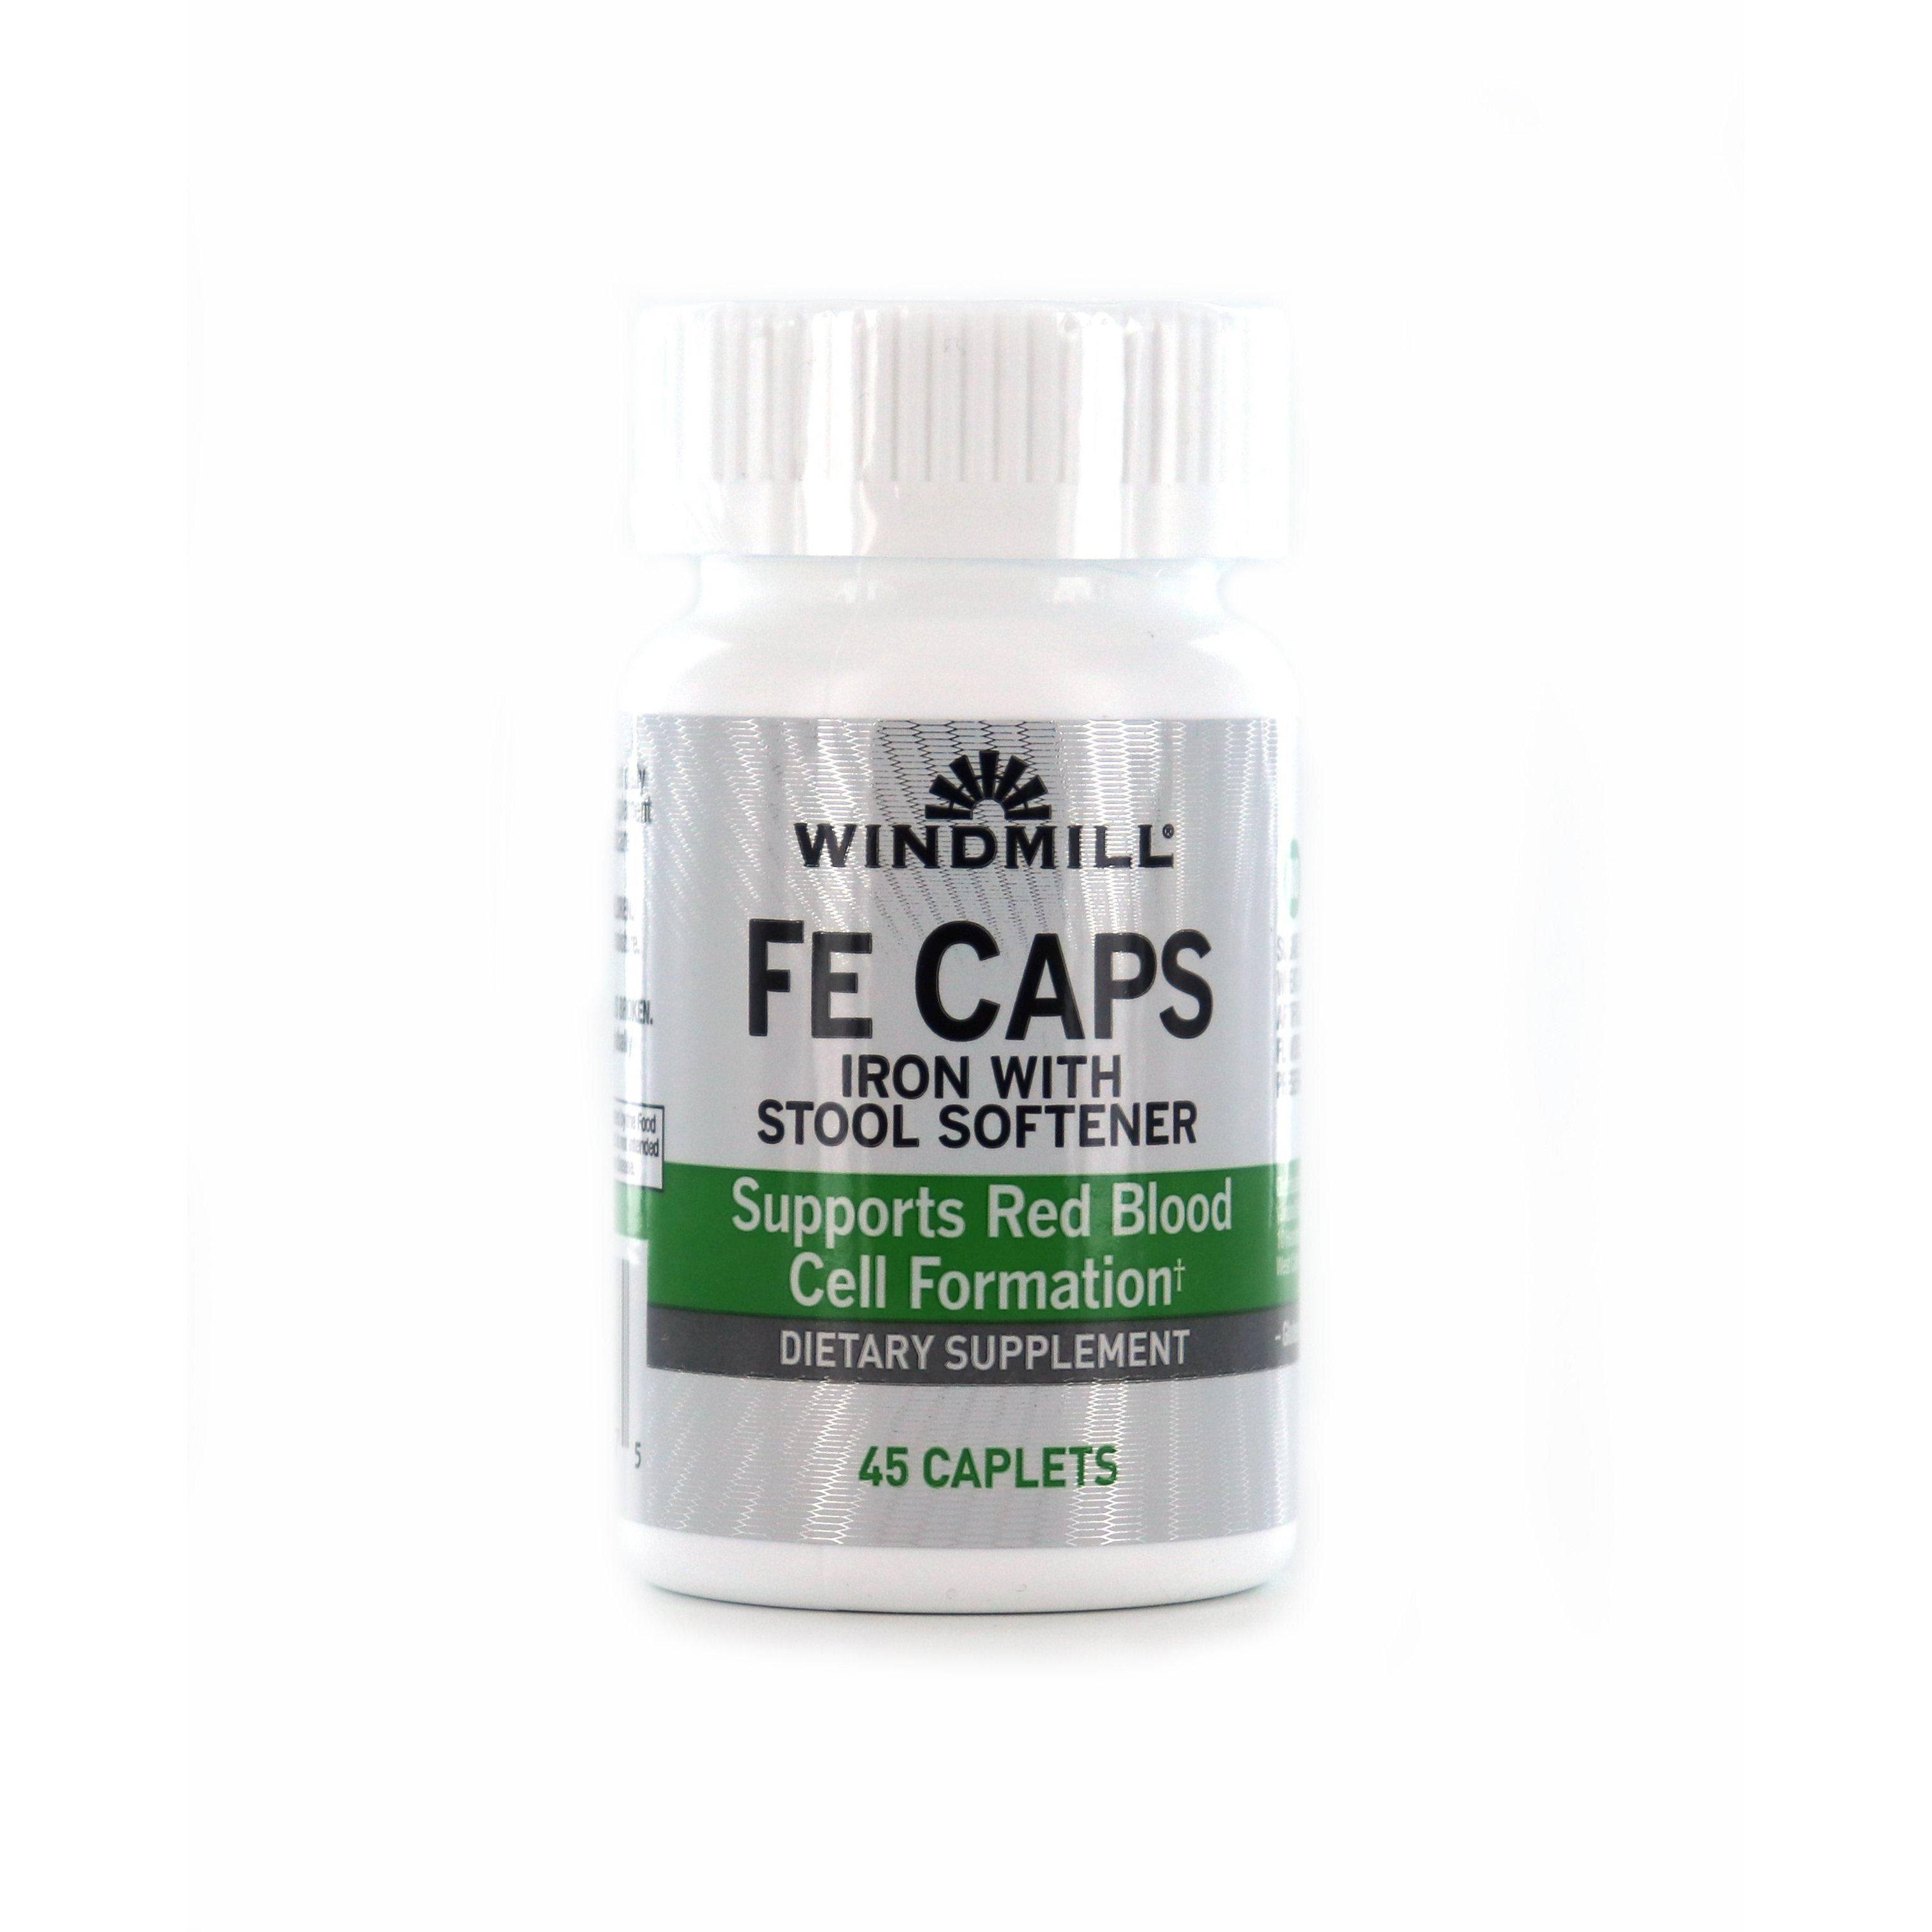 Windmill Fe Caps with Stool Softener - 45 Caplets